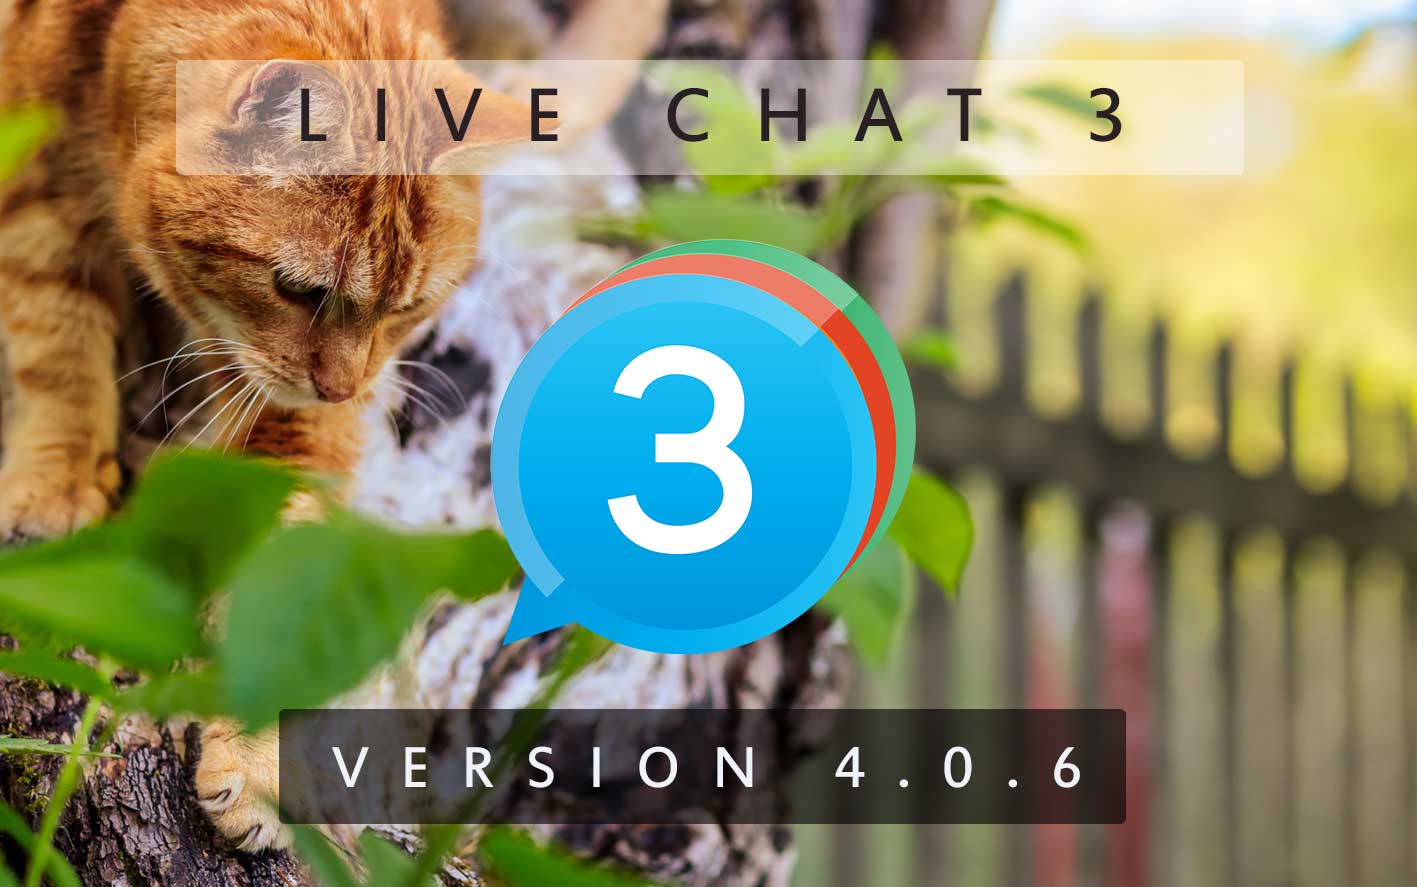 Live Chat 3 - Version 4.0.6